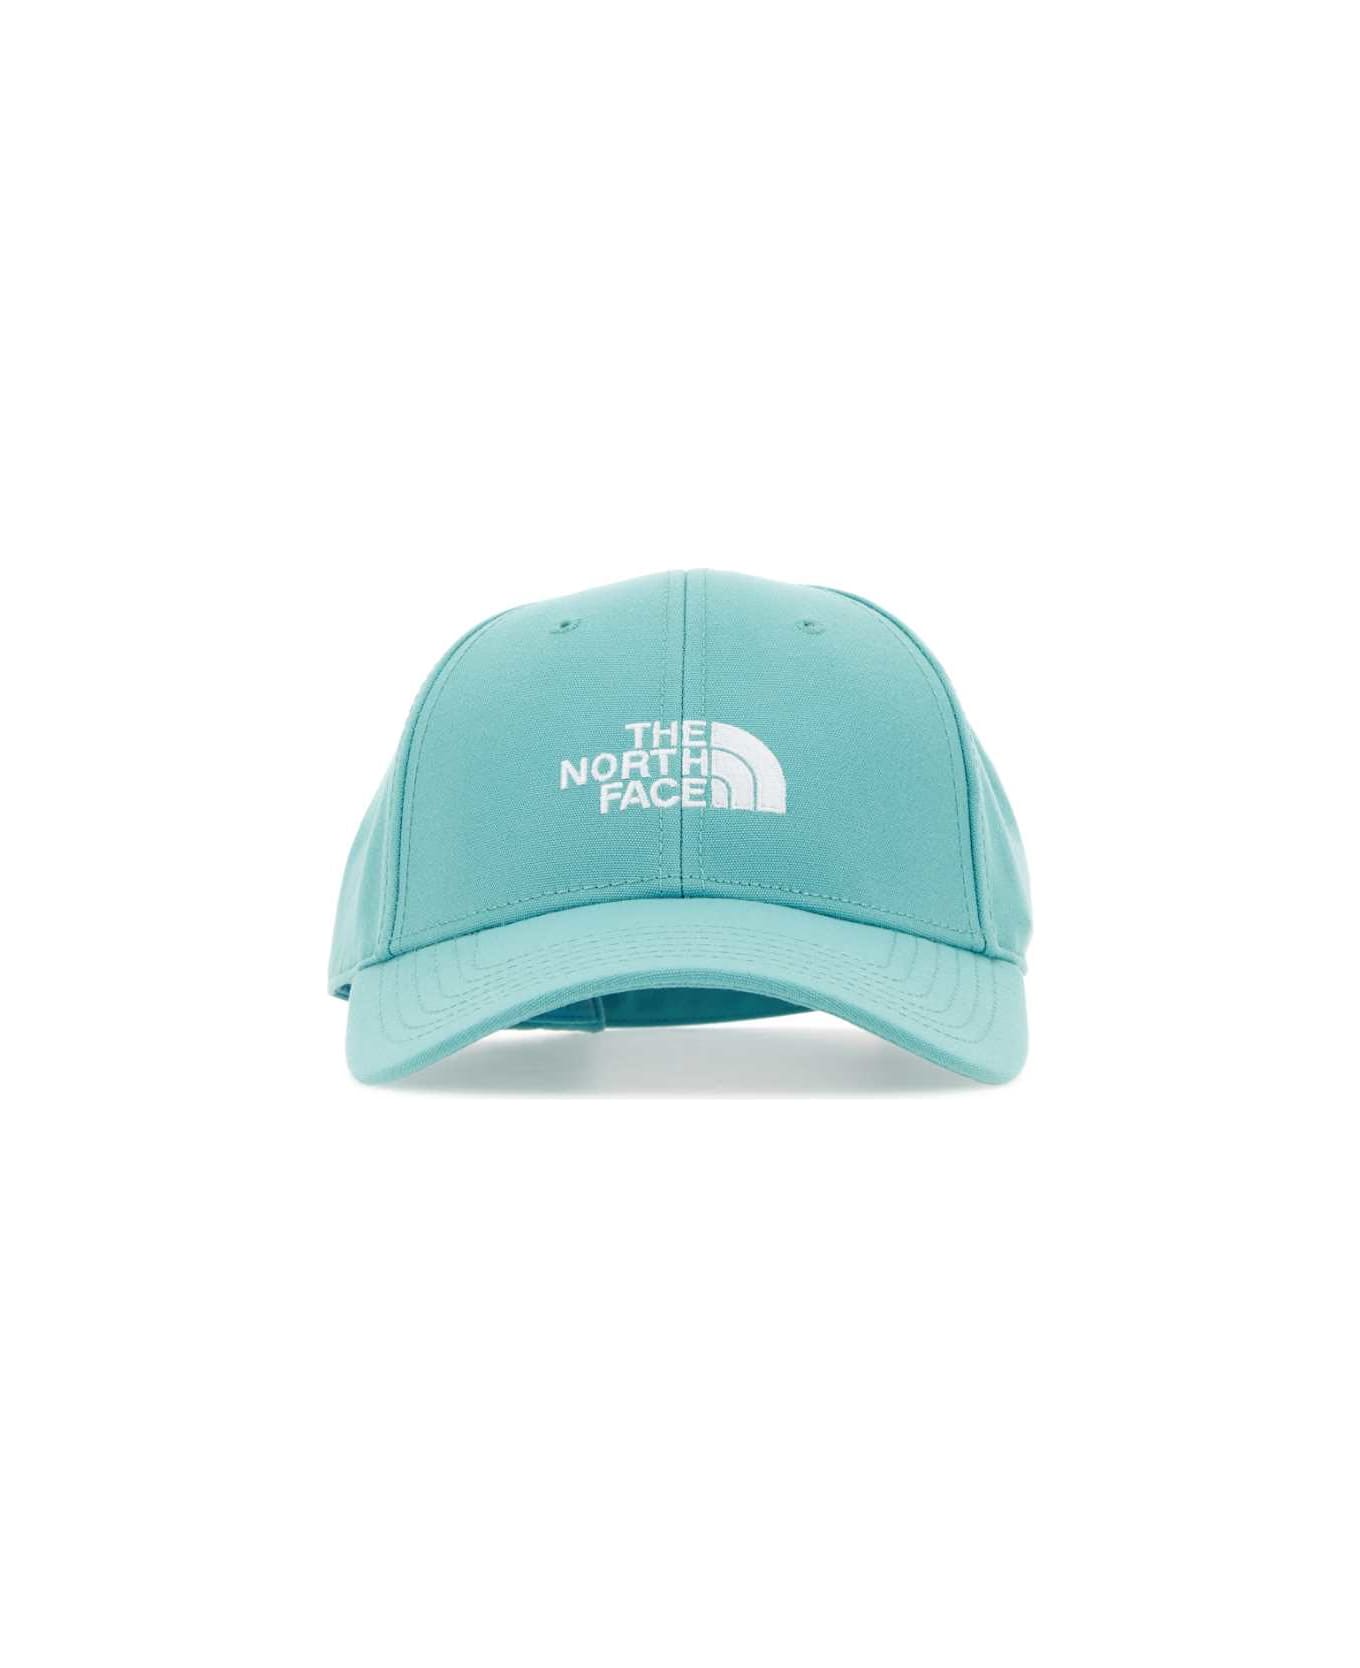 The North Face Tiffany Polyester Baseball Cap - REEF WATERS